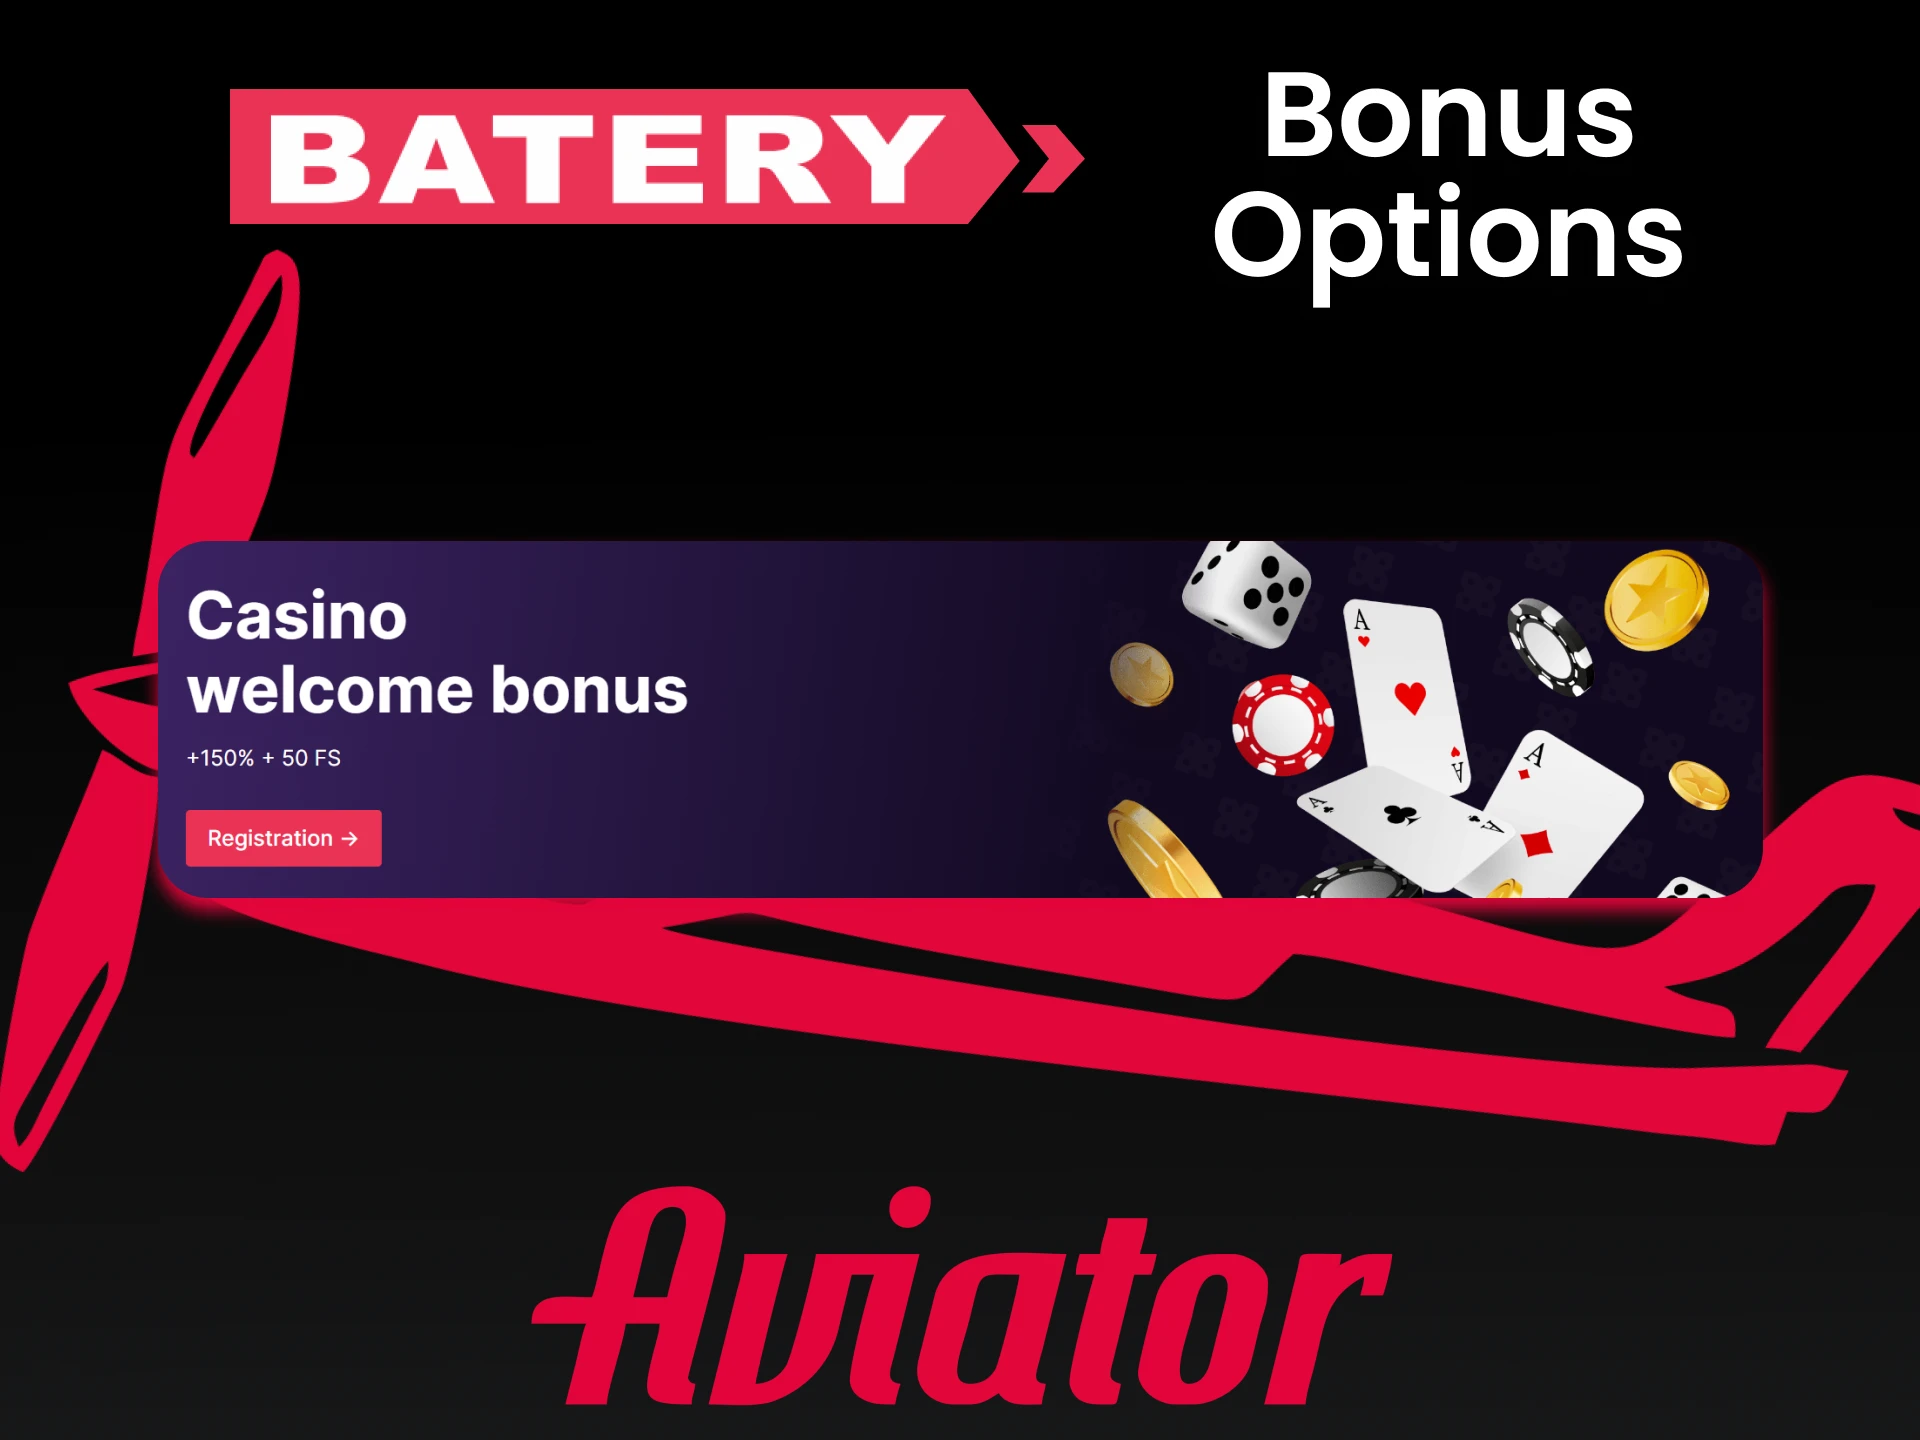 Get a bonus from Batery for victories in the game Aviator.